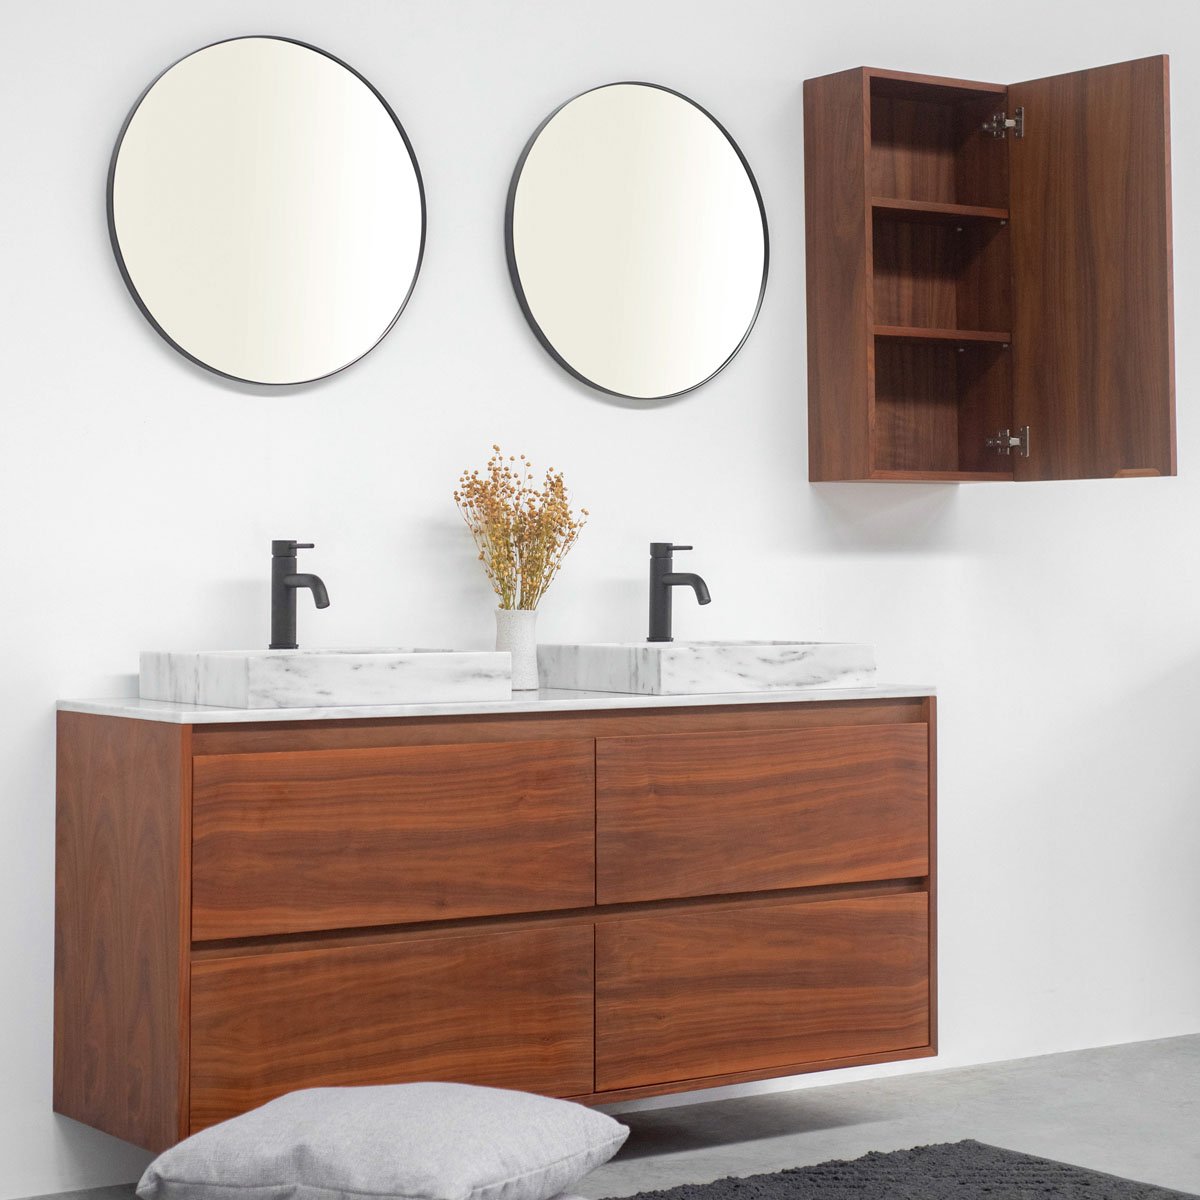 Furnified - Unique and affordable bathroom design